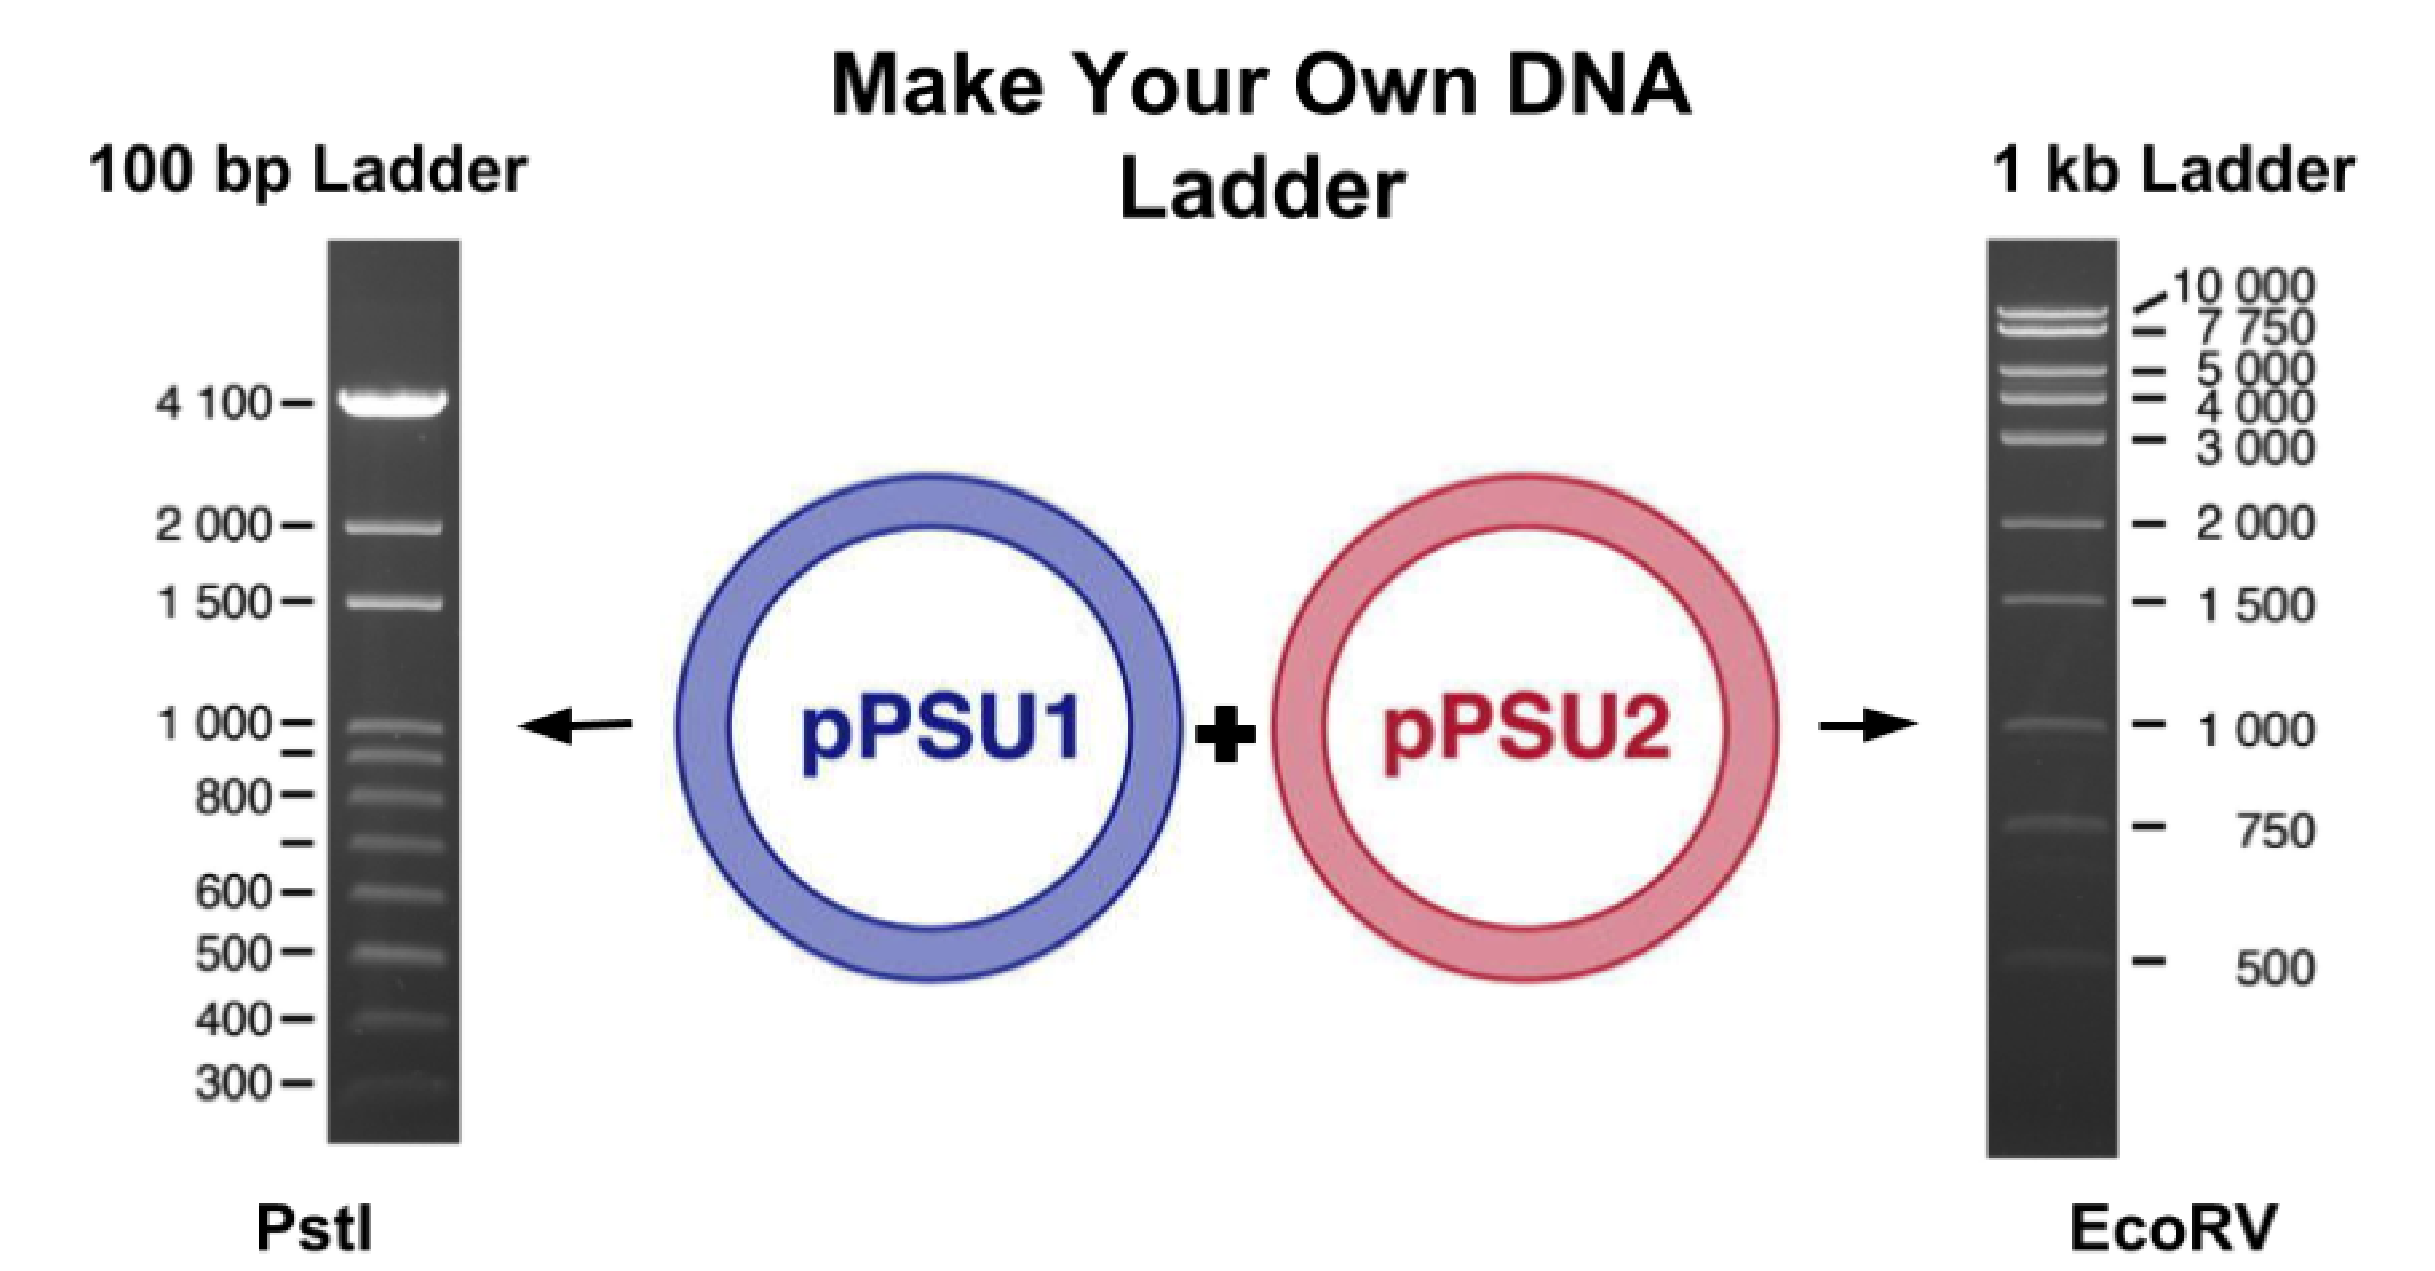 PSU DNA Ladders-01-574867-edited.png